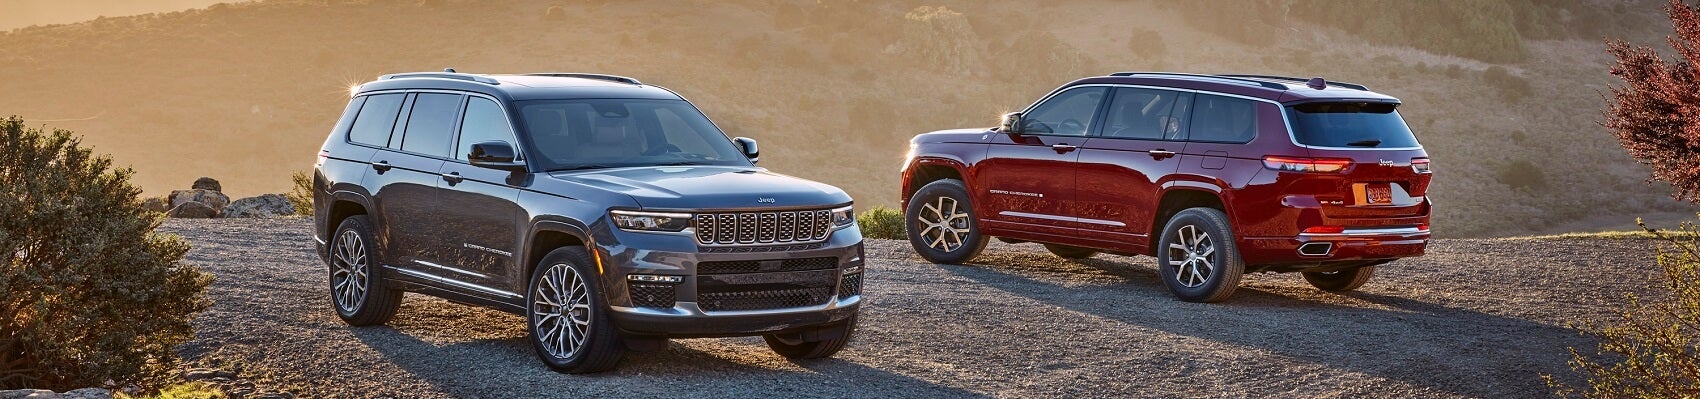 Jeep Grand Cherokee L Review